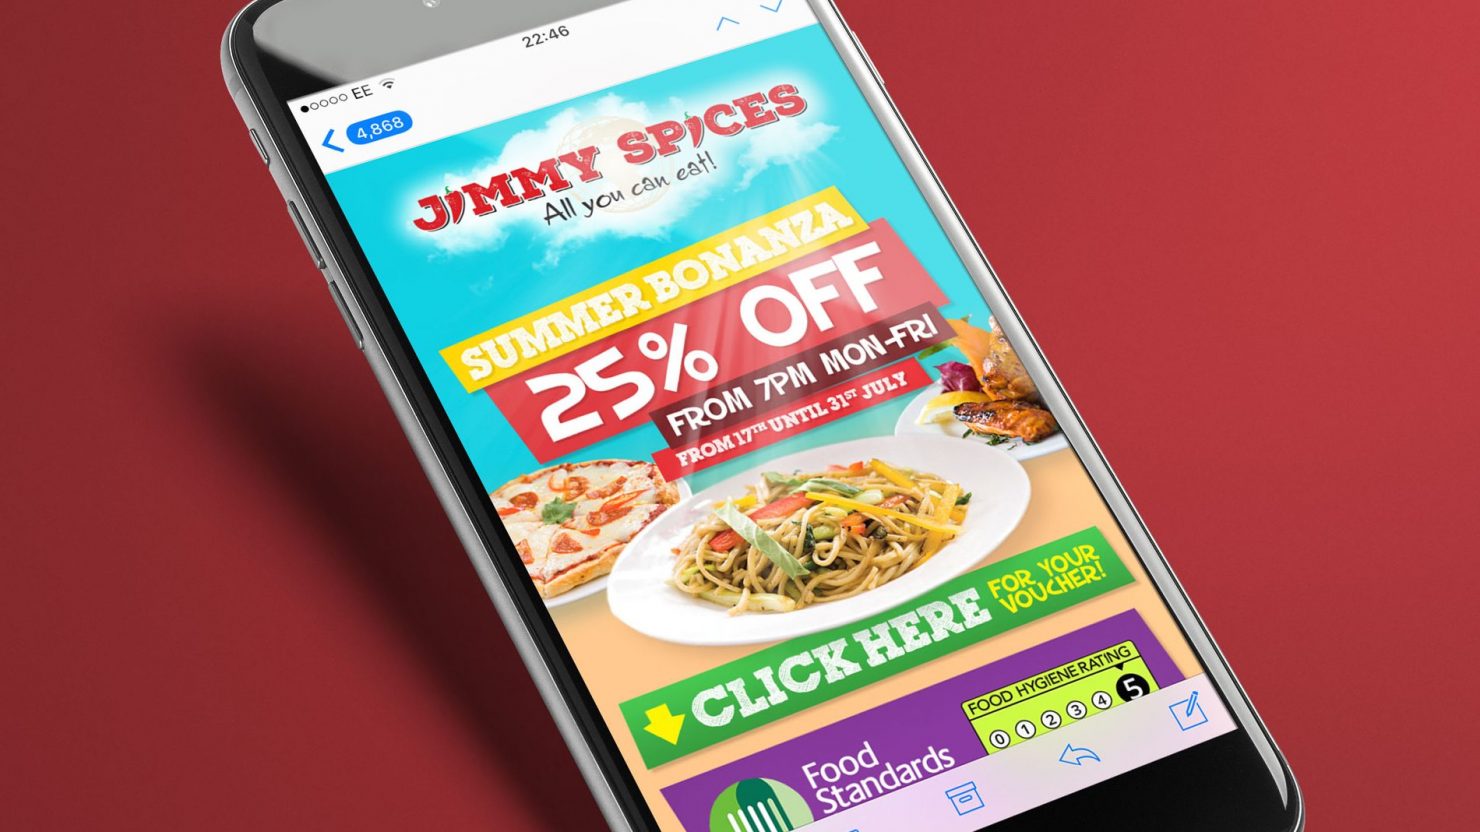 iPhone showing responsive email marketing campaign for Birmingham restaurant Jimmy Spices